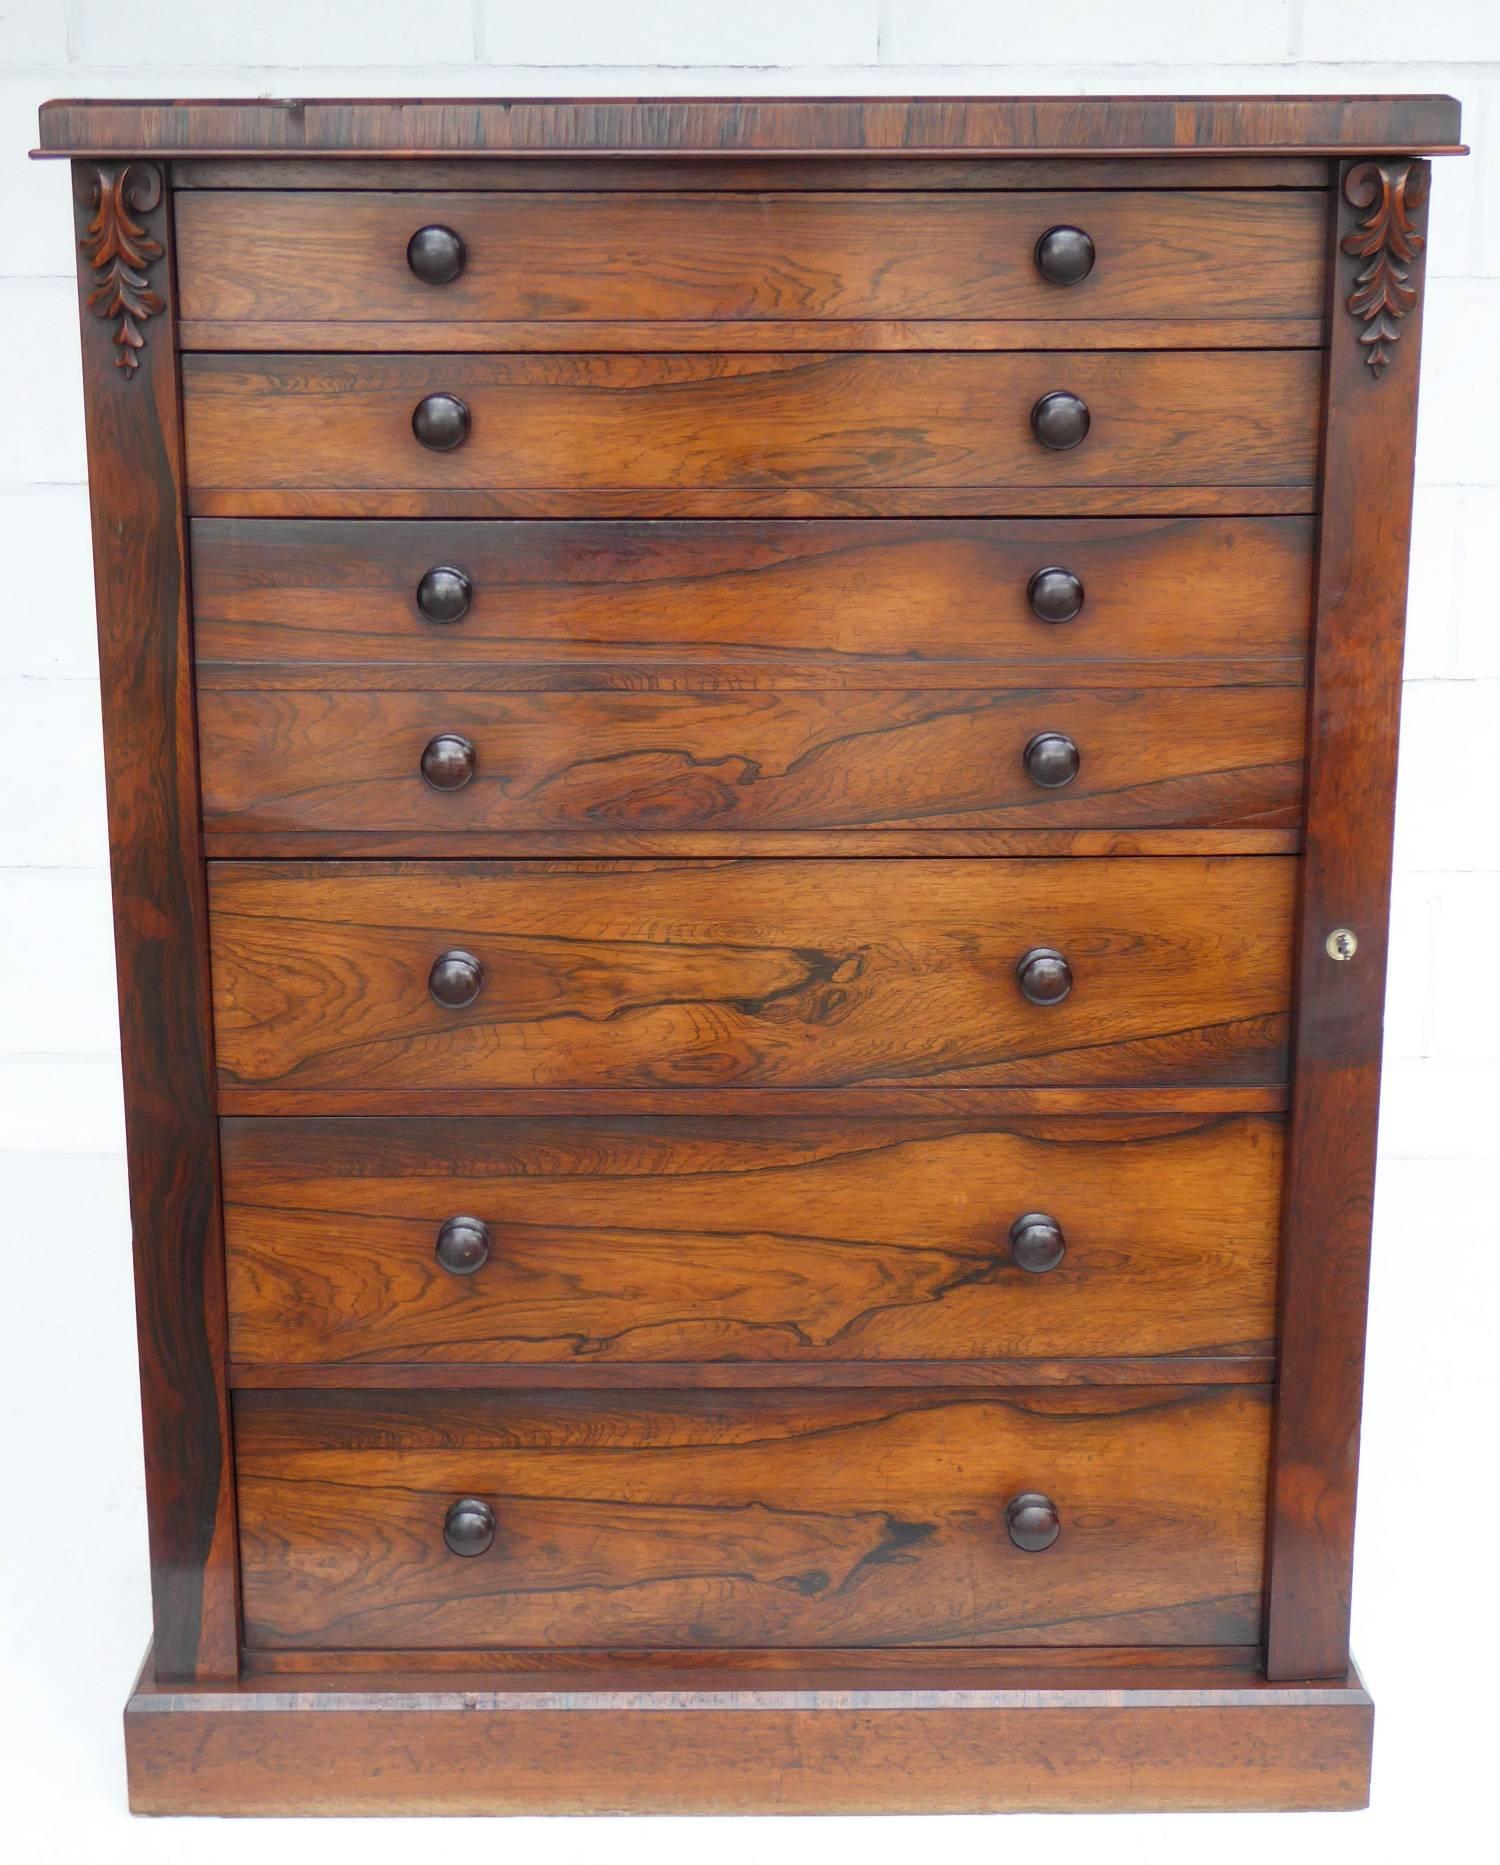 For sale is a very good quality Victorian rosewood secretaire Wellington chest. The chest has six graduated drawers, each with turned handles. The third drawer down is a secretaire, with a fall front opening to reveal a fitted interior comprising